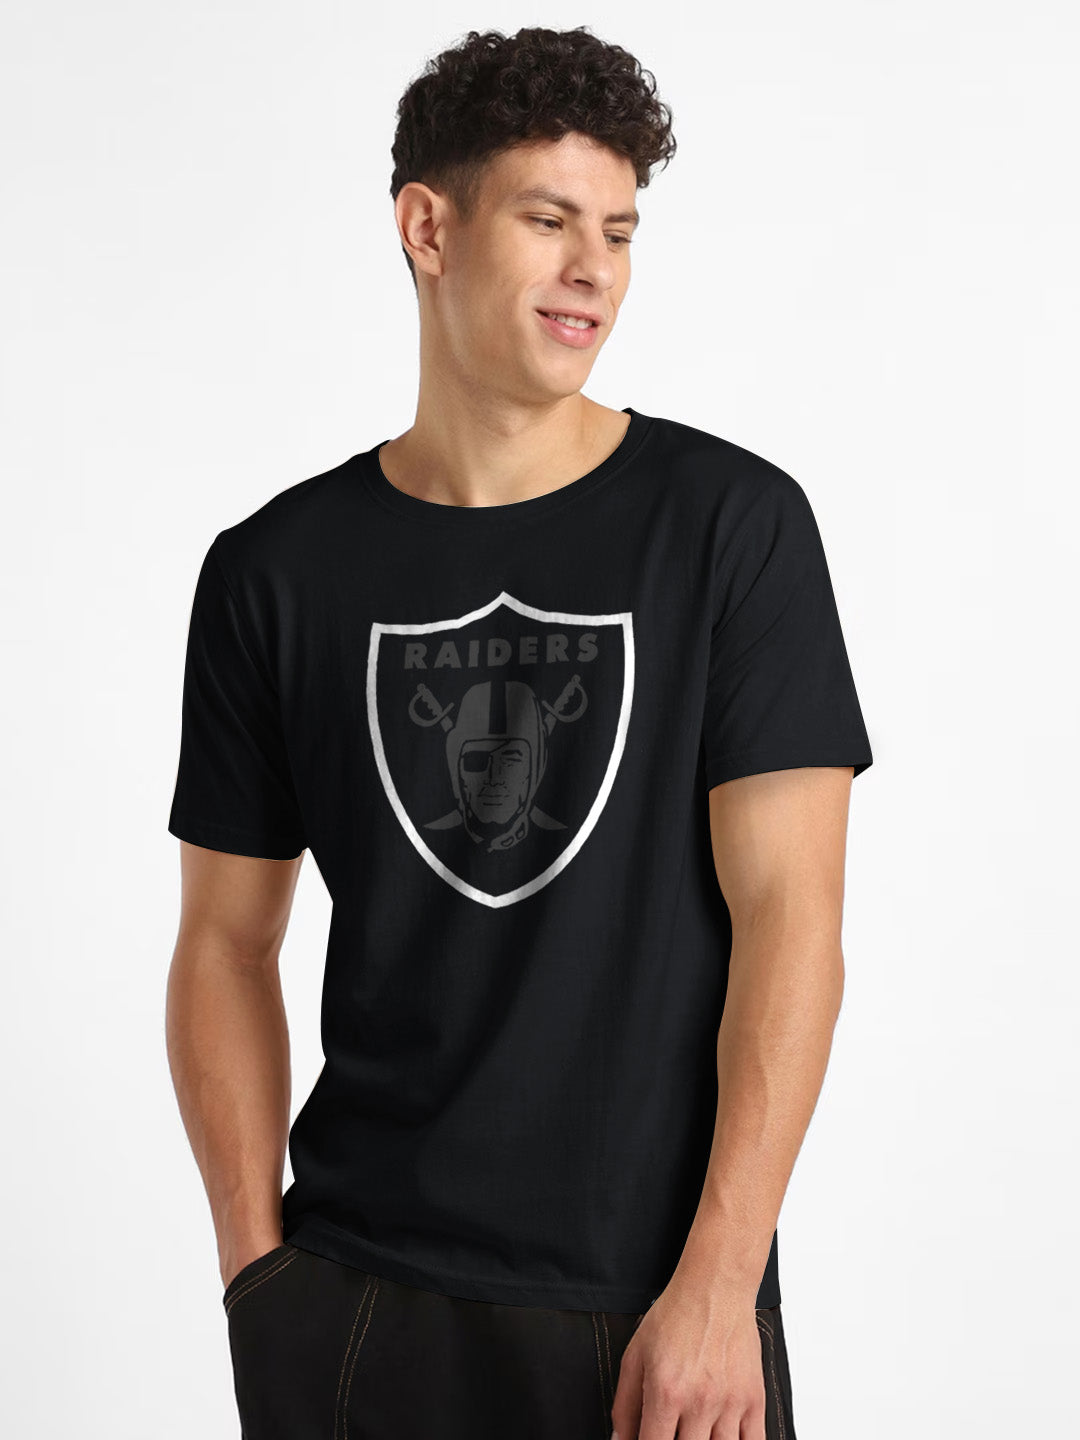 47 Single Jersey Crew Neck Tee Shirt For Men-Black with Print-BE1020